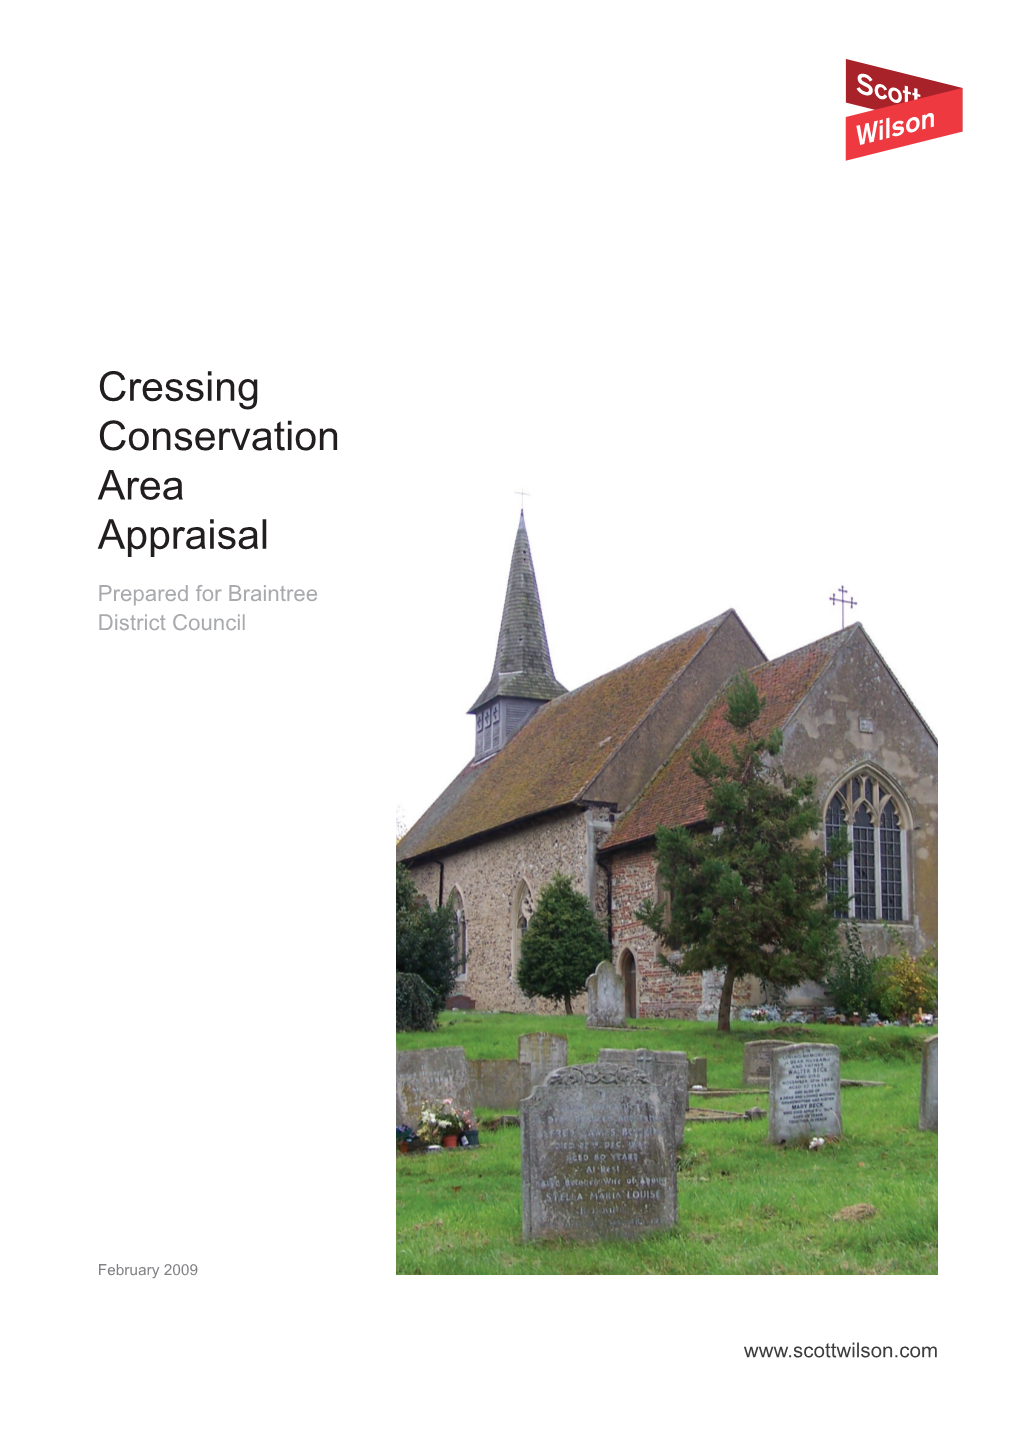 Cressing Conservation Area Appraisal